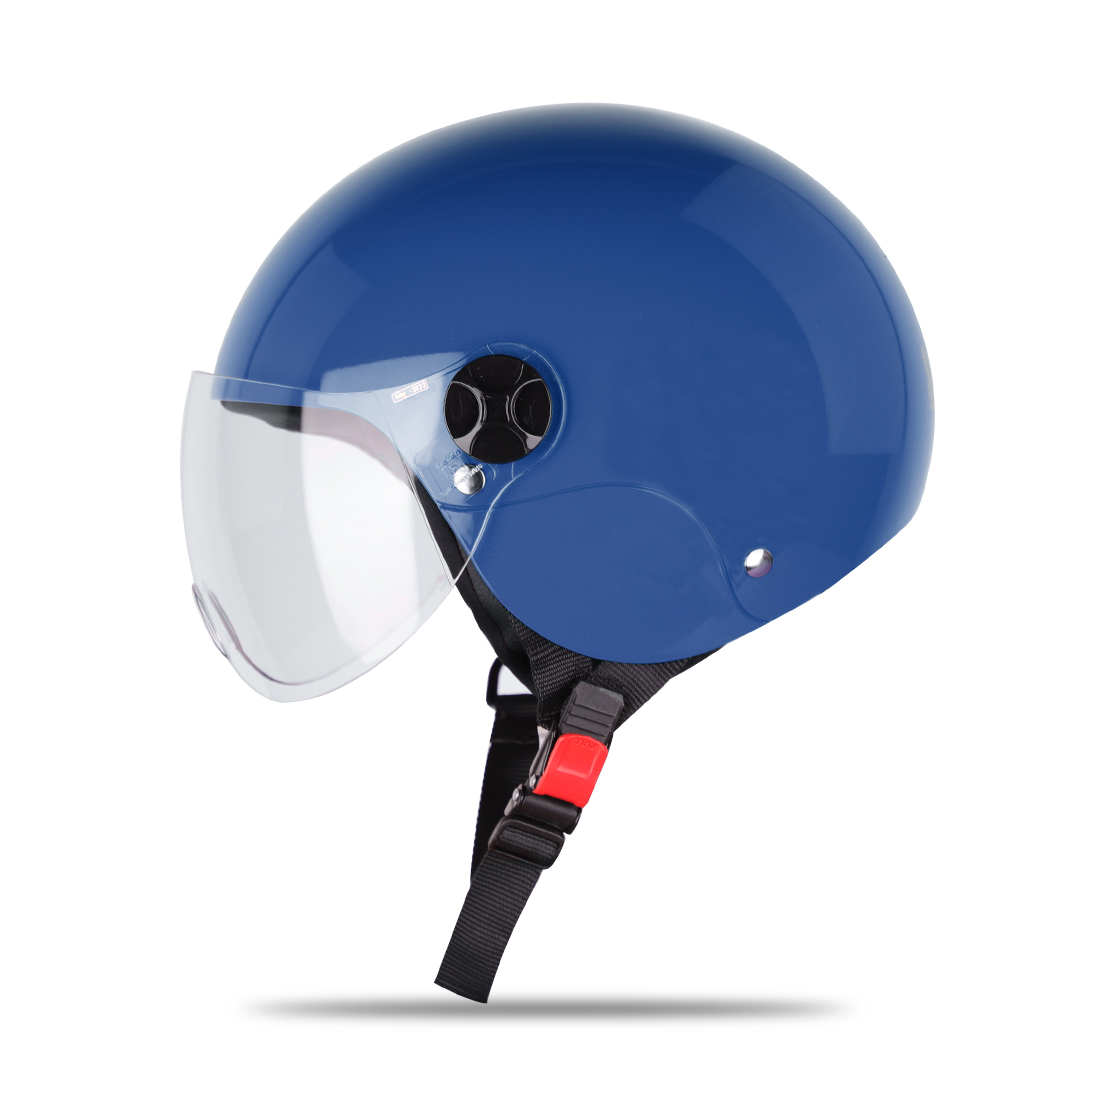 Steelbird SBH-16 Dex ISI Certified Open Face Helmet (Glossy Blue With Clear Visor)